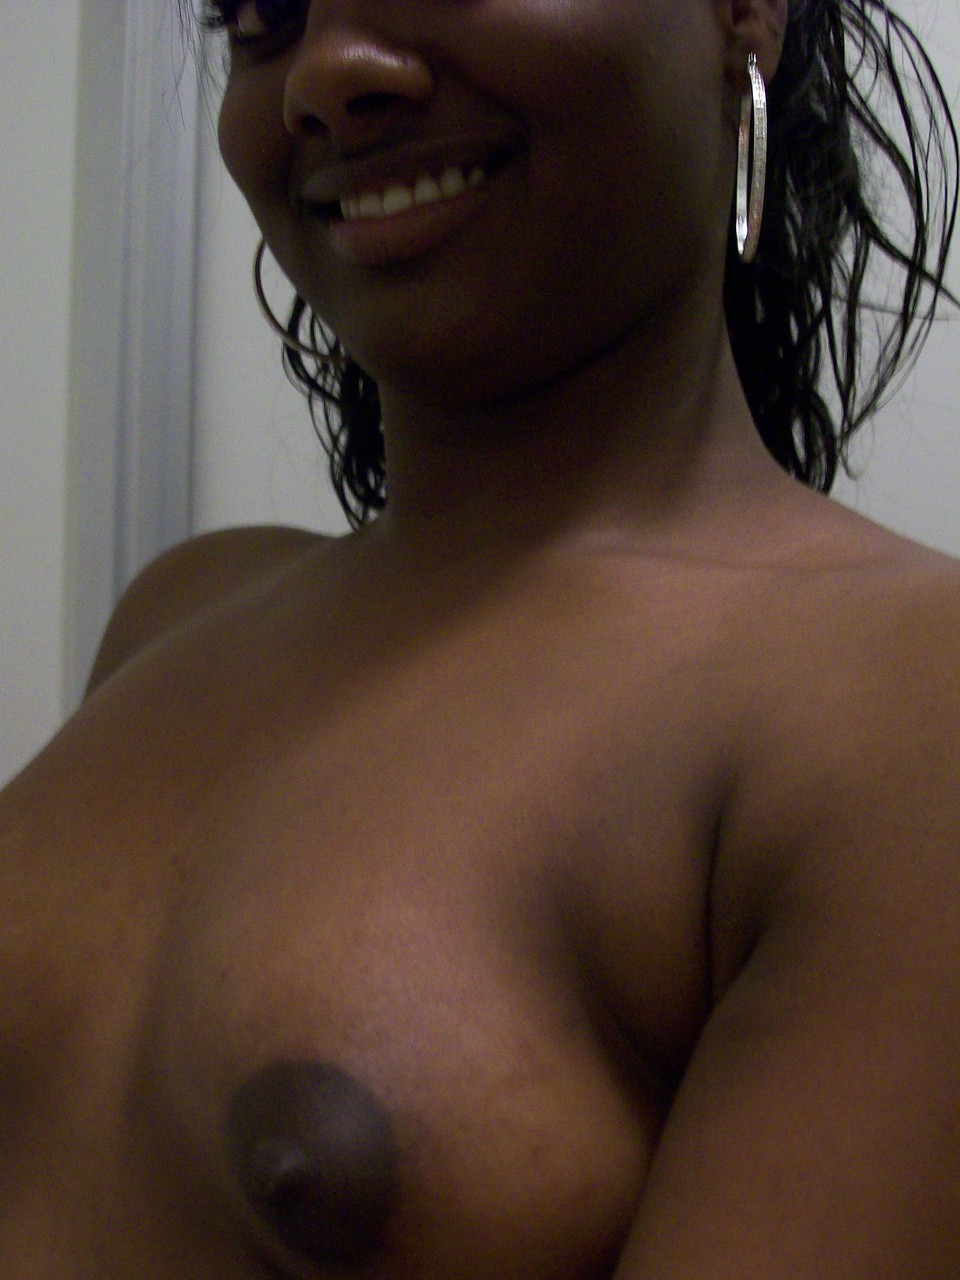 Ebony Teen Paris Takes Selfies While Showing Her Big Ass Puffy Nipples